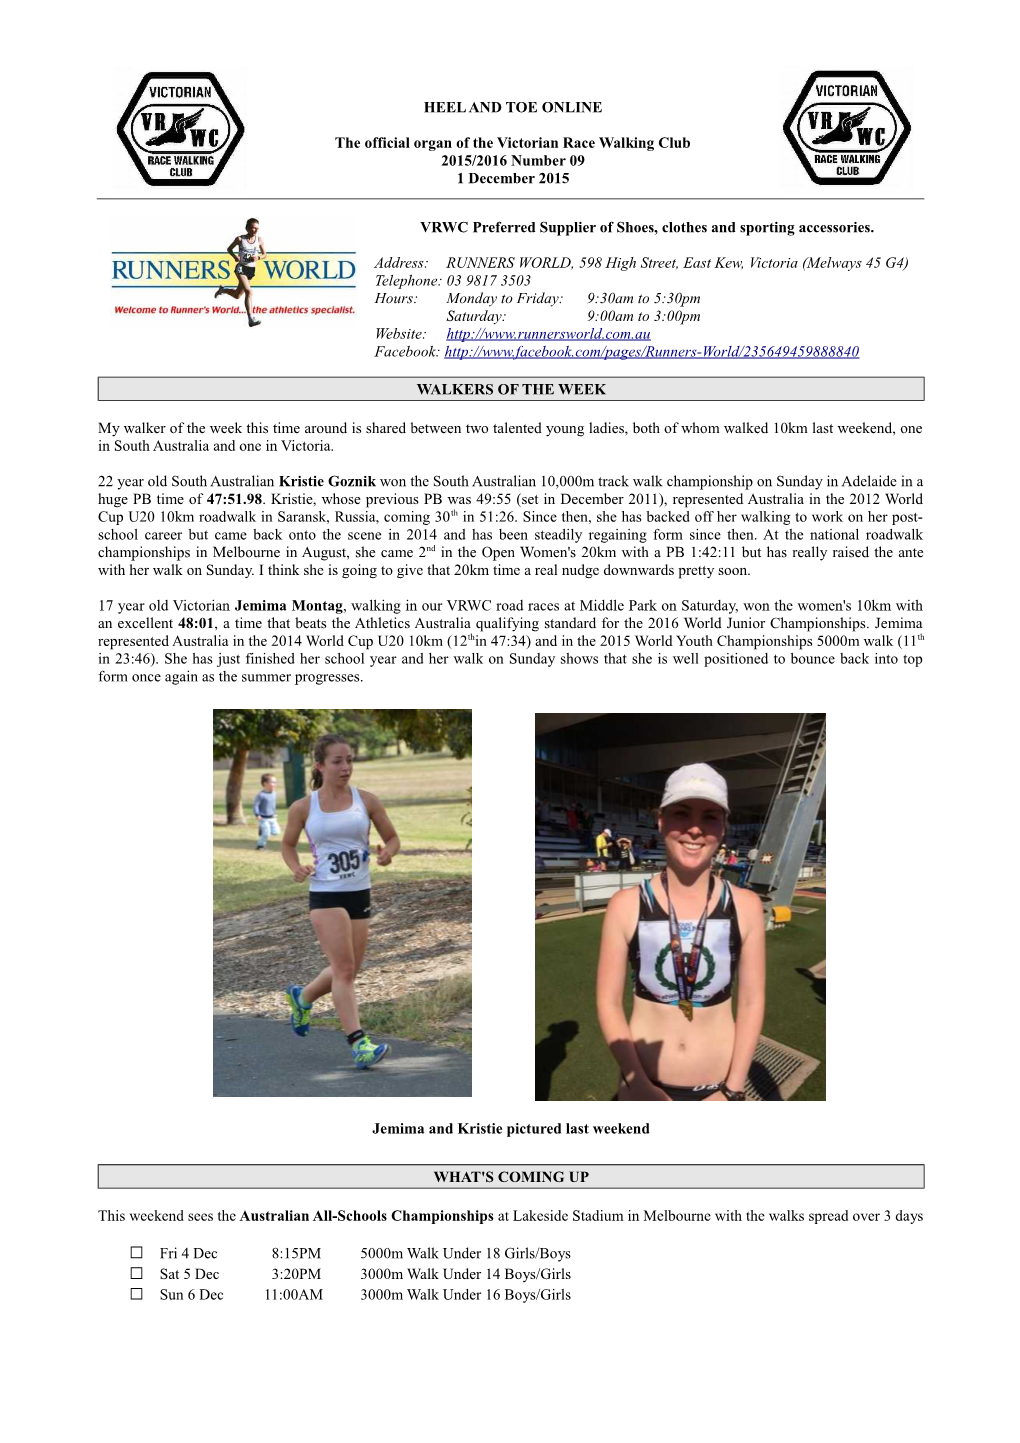 HEEL and TOE ONLINE the Official Organ of the Victorian Race Walking Club 2015/2016 Number 09 1 December 2015 VRWC Preferred